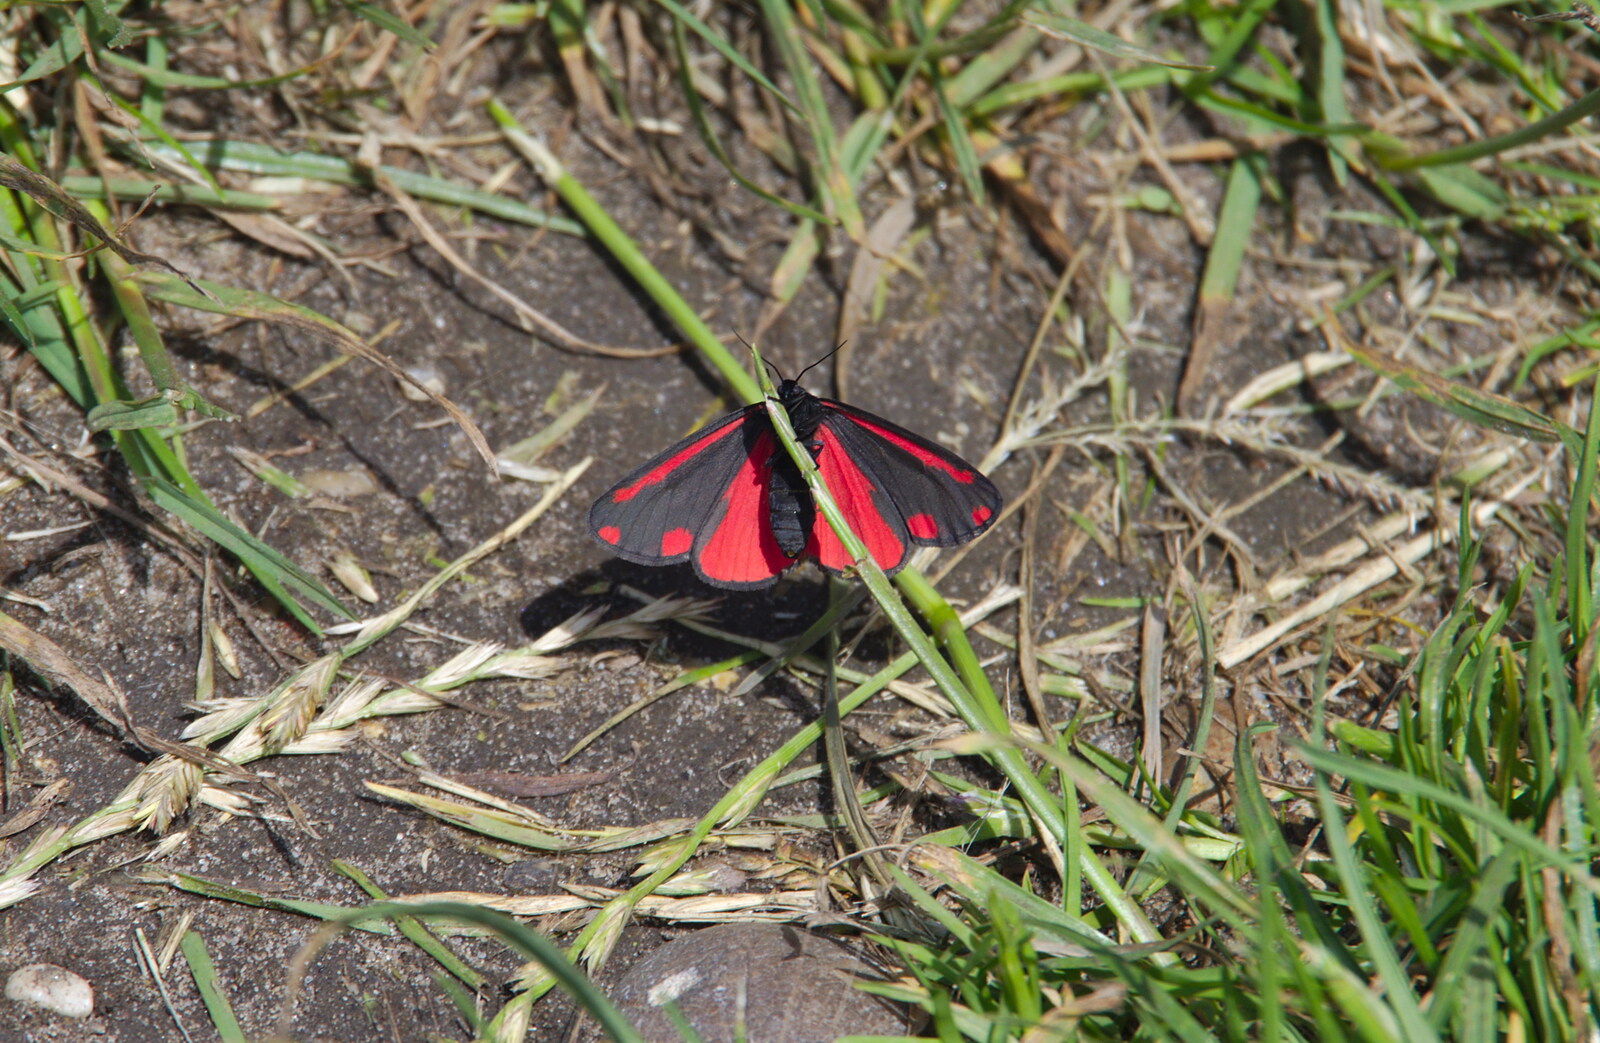 A cool black and red butterfly from Cliff House Camping, Dunwich, Suffolk - 15th June 2019